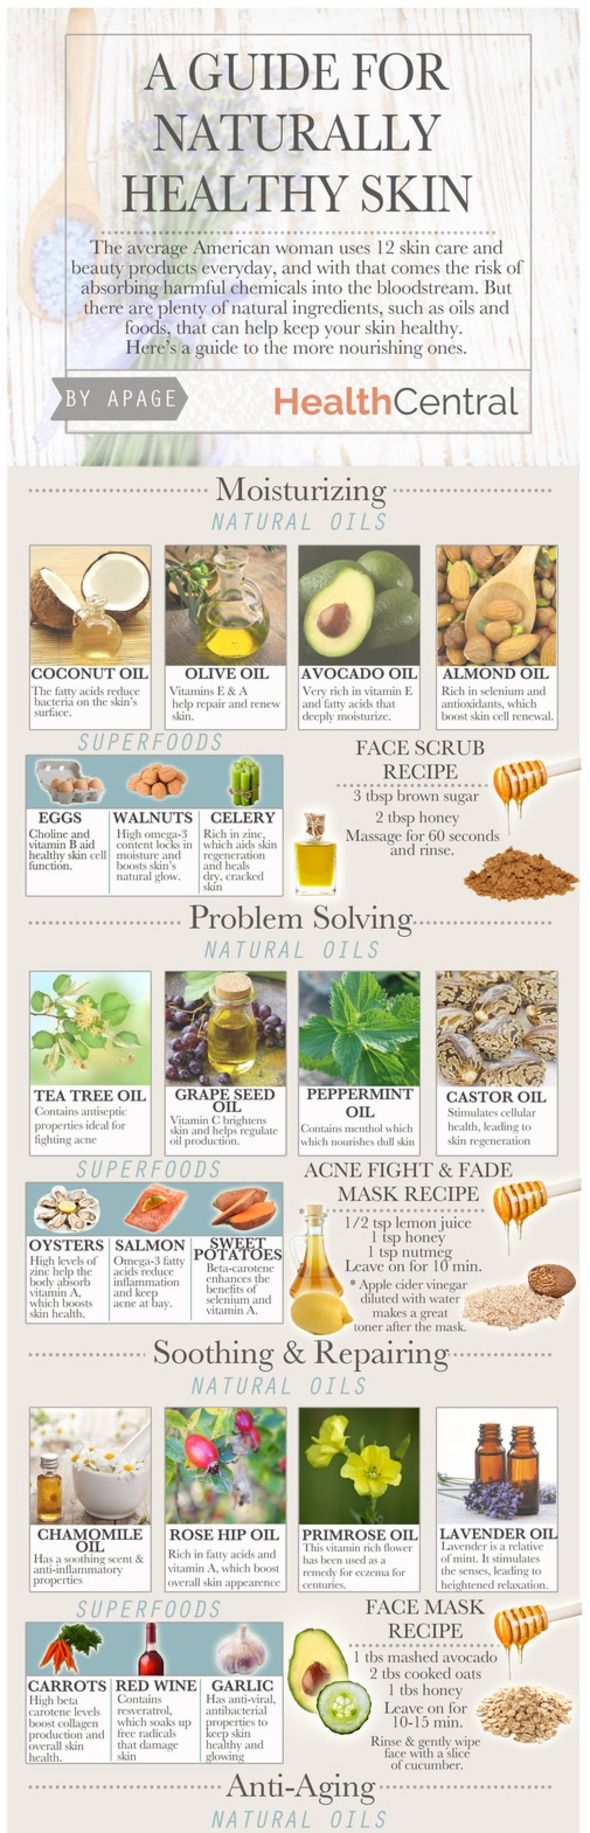 A Guide for Naturally Healthy Skin